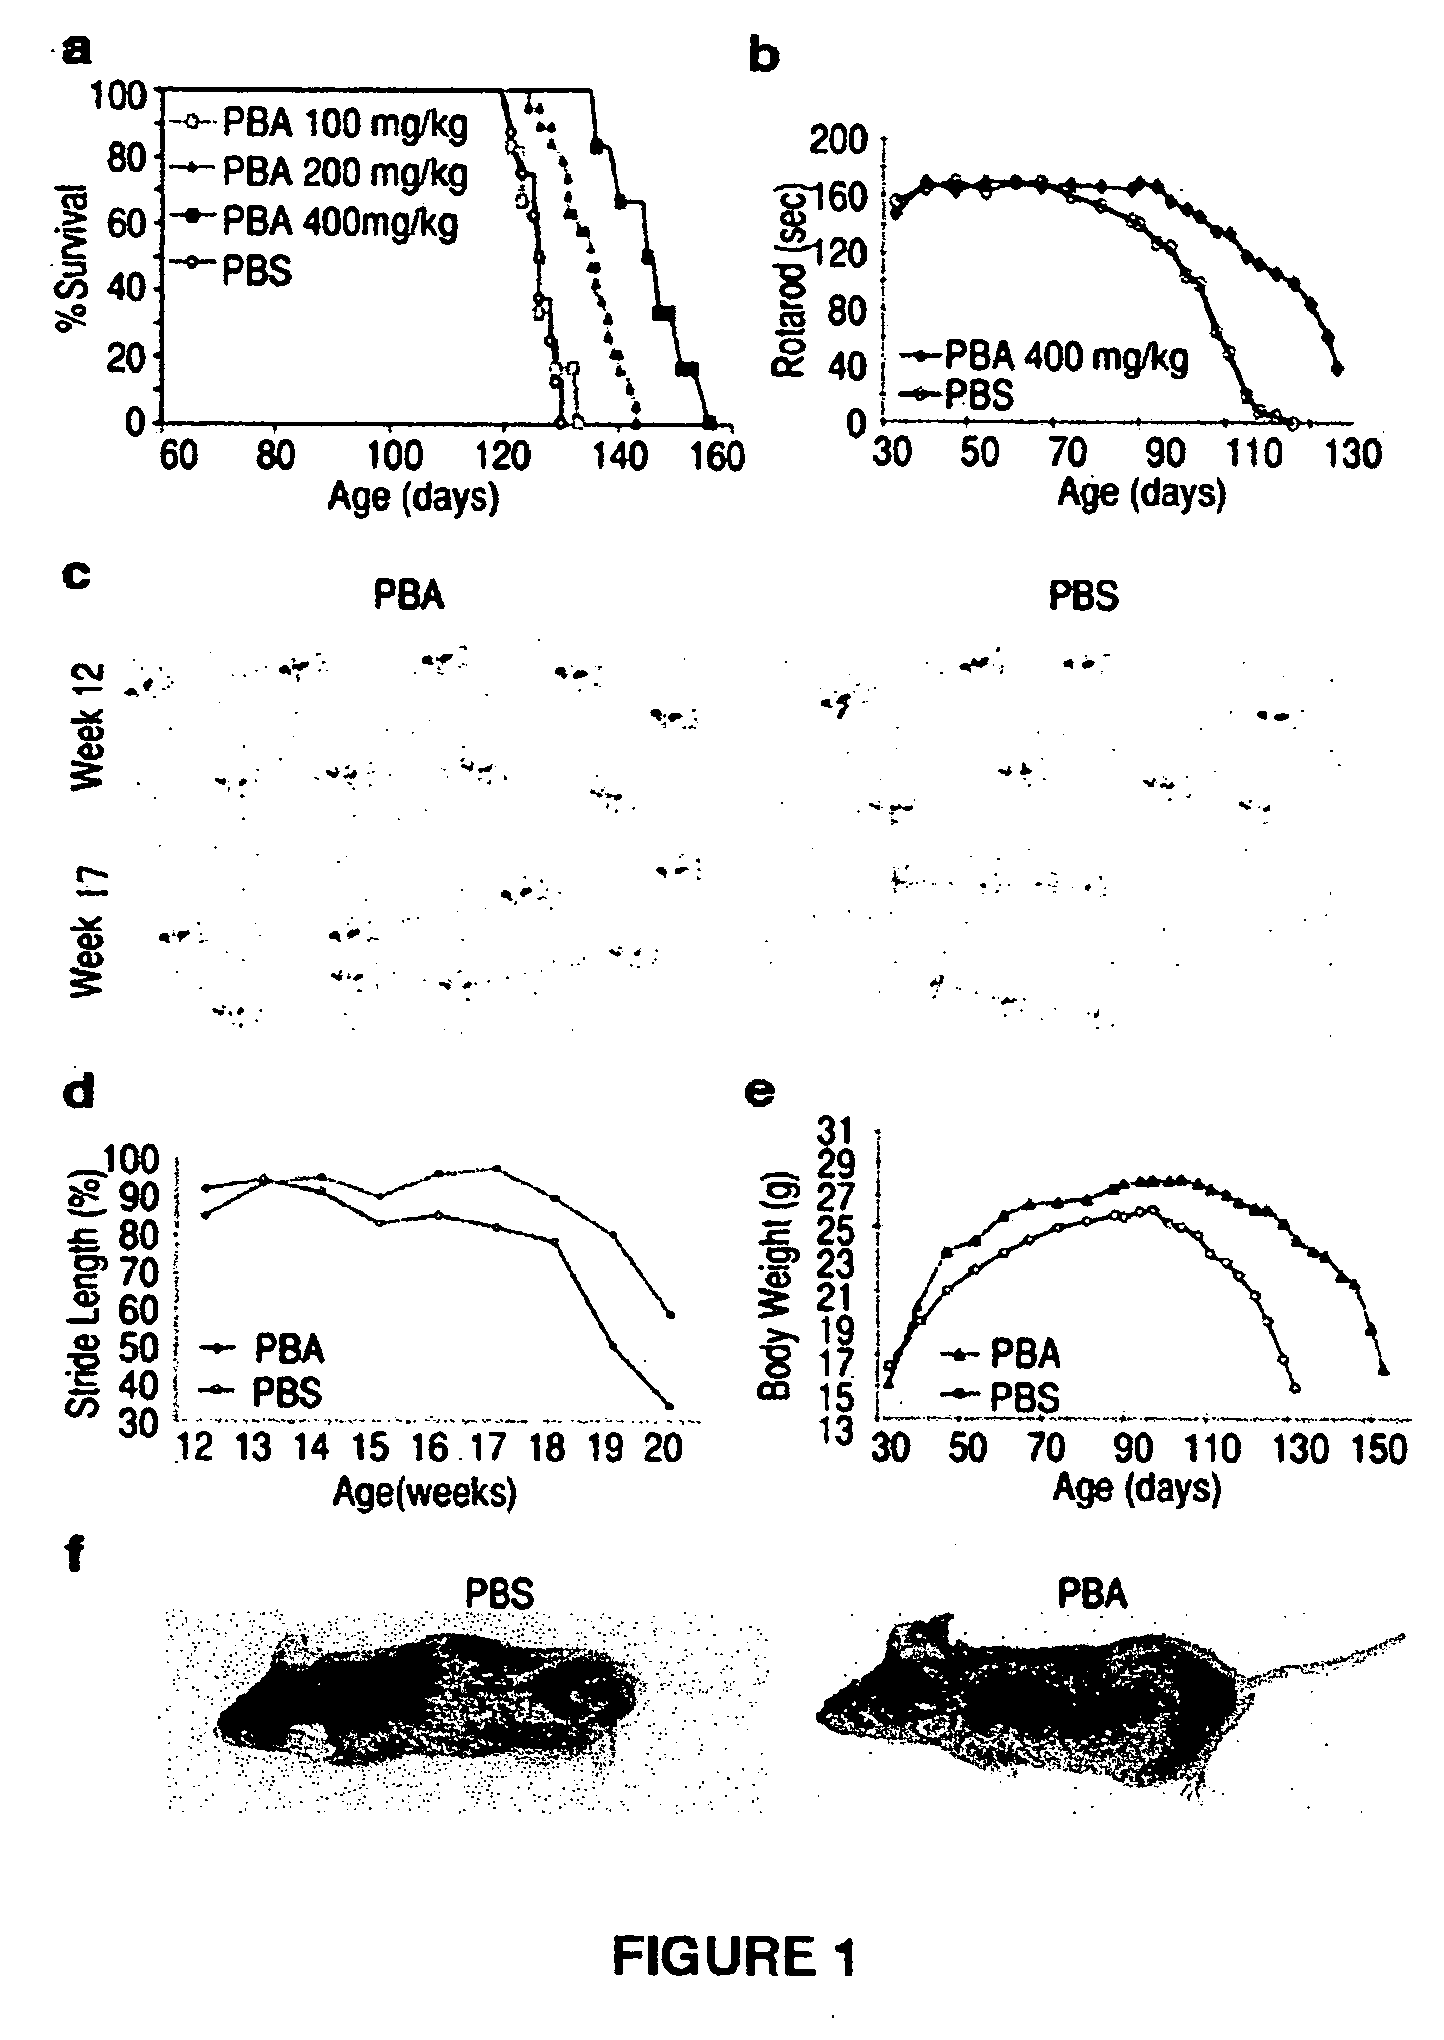 Method of ameliorating or abrogating the effects of a neurodegenerative disorder, such as amyotrophic lateral sclerosis (ALS), by using a HDAC inhibiting agent